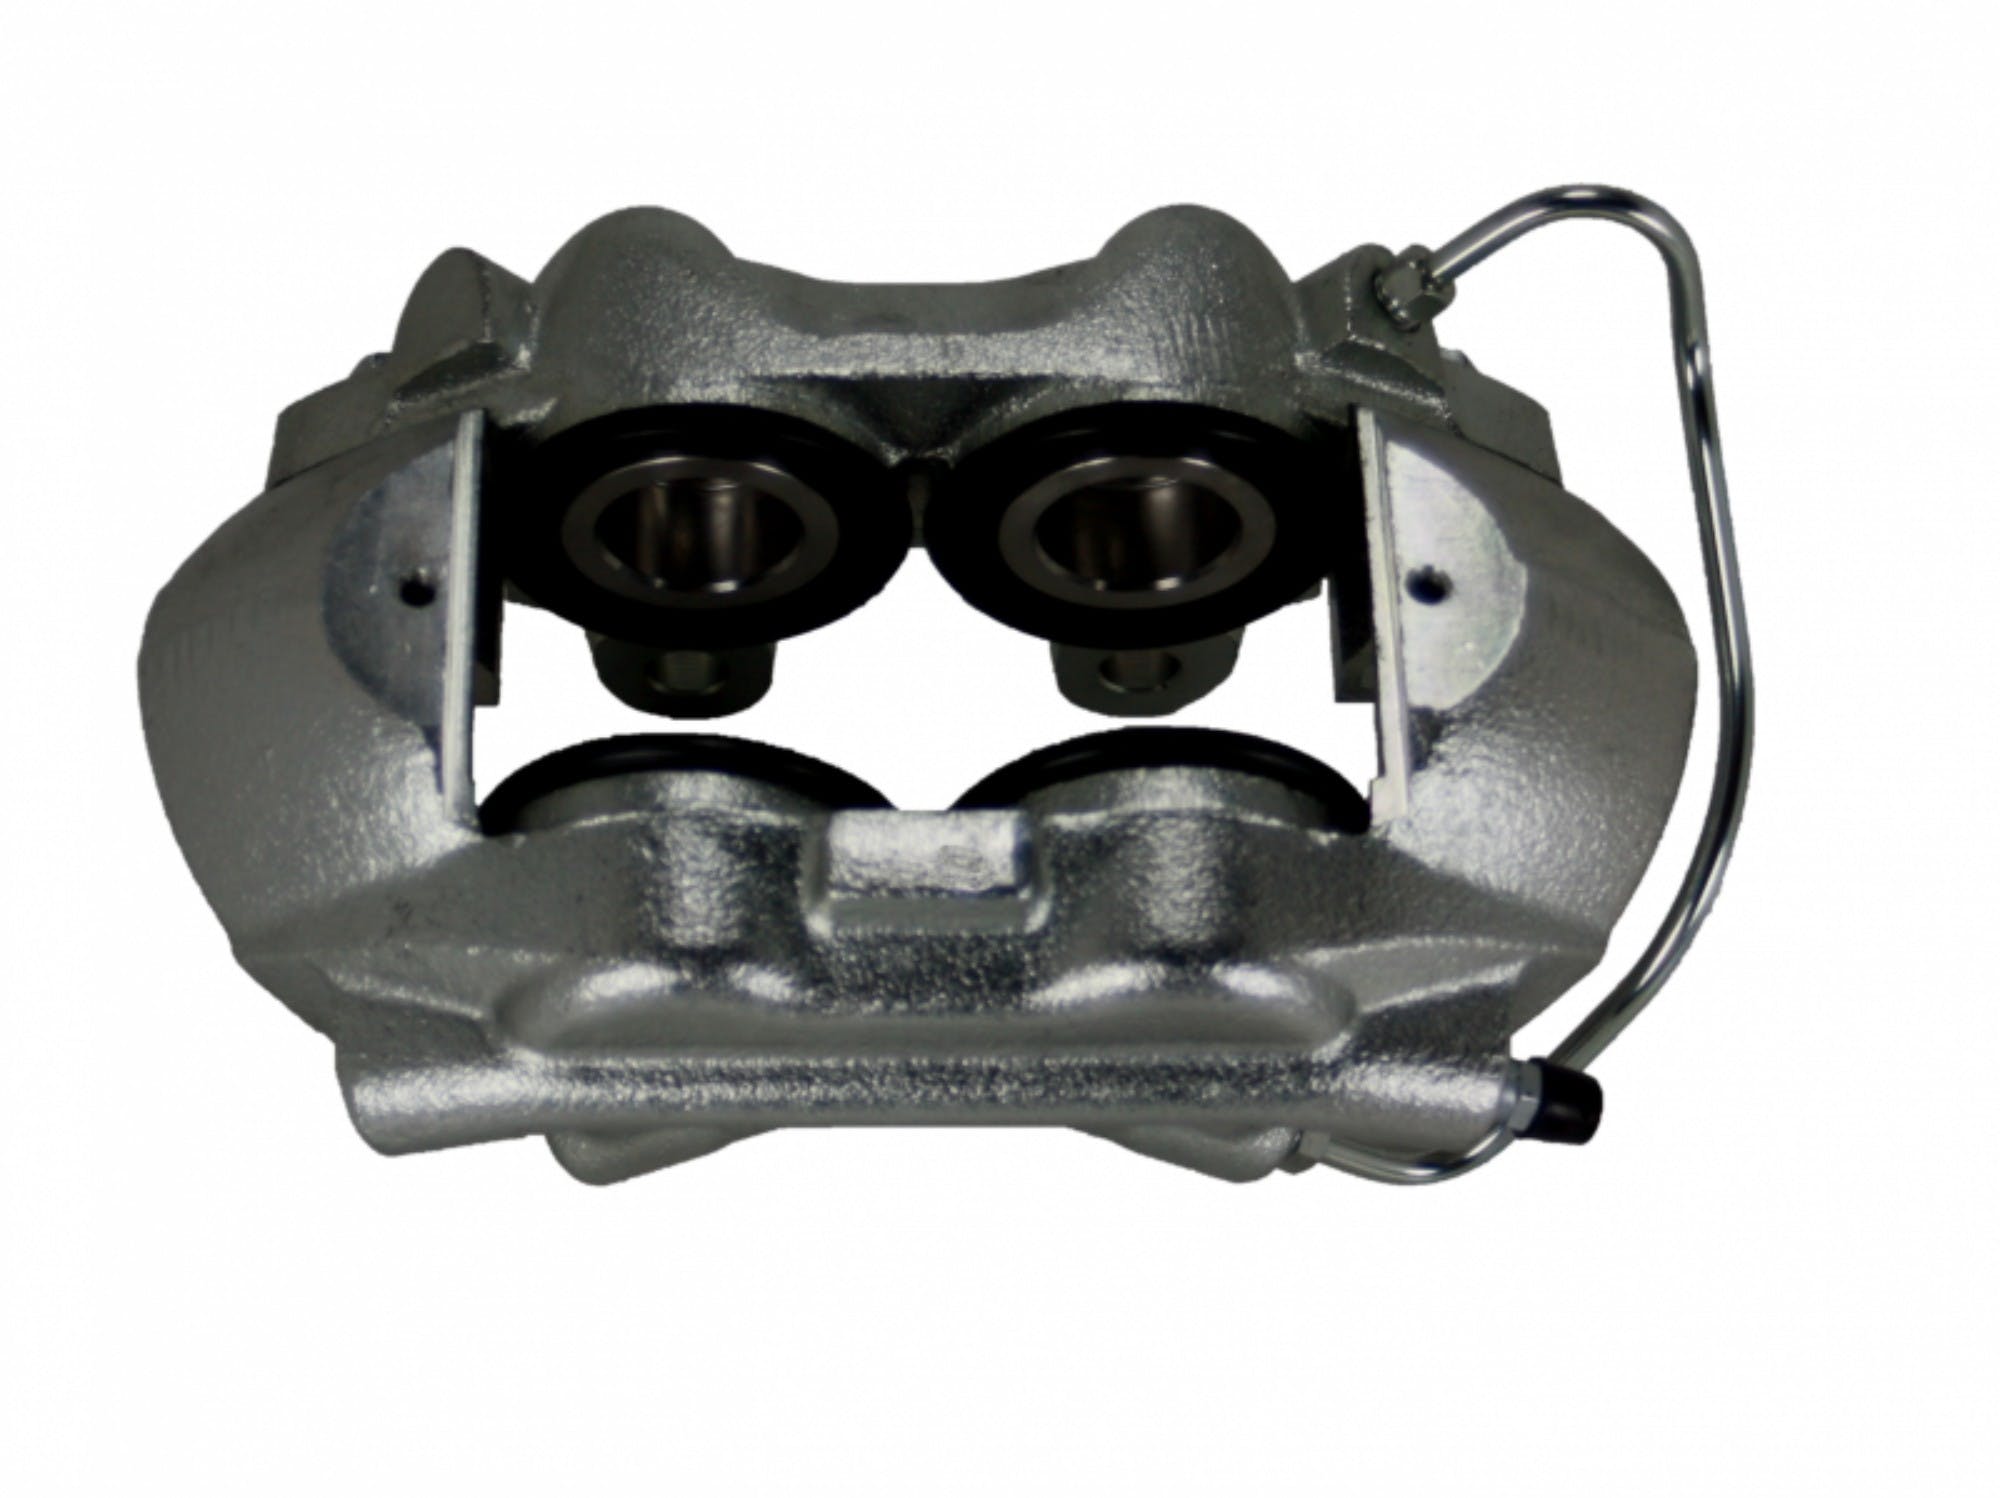 LEED Brakes A4401LD 4 Piston Caliper with Stainless Steel Pistons - Loaded LH